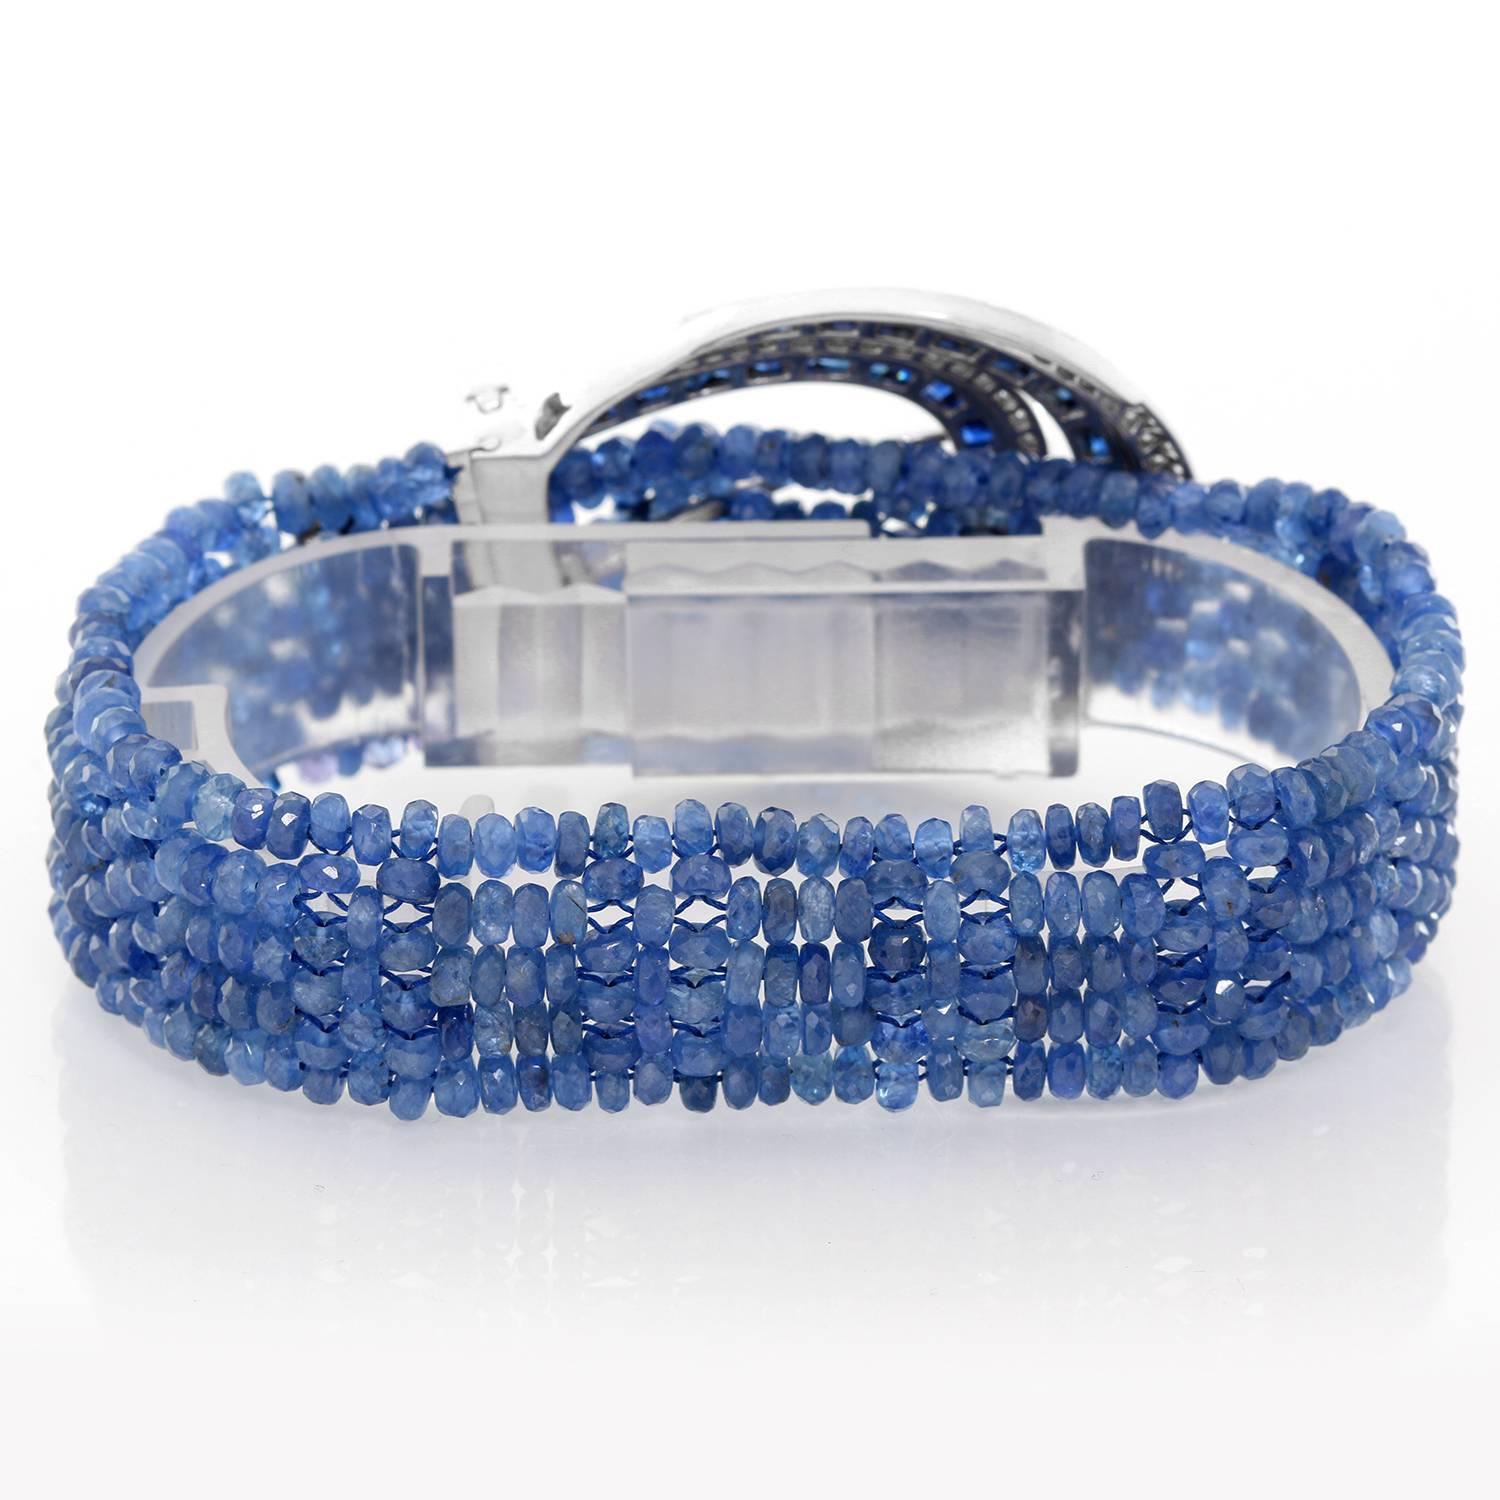 Tanzanite, Diamond and Sapphire 18K White Gold Bracelet - . Rare 18K White Gold buckle bracelet with diamonds on the buckle, weighing 2.55 cts and with Sapphires. Bracelet made out of Tanzanite beads. Adjustable length.